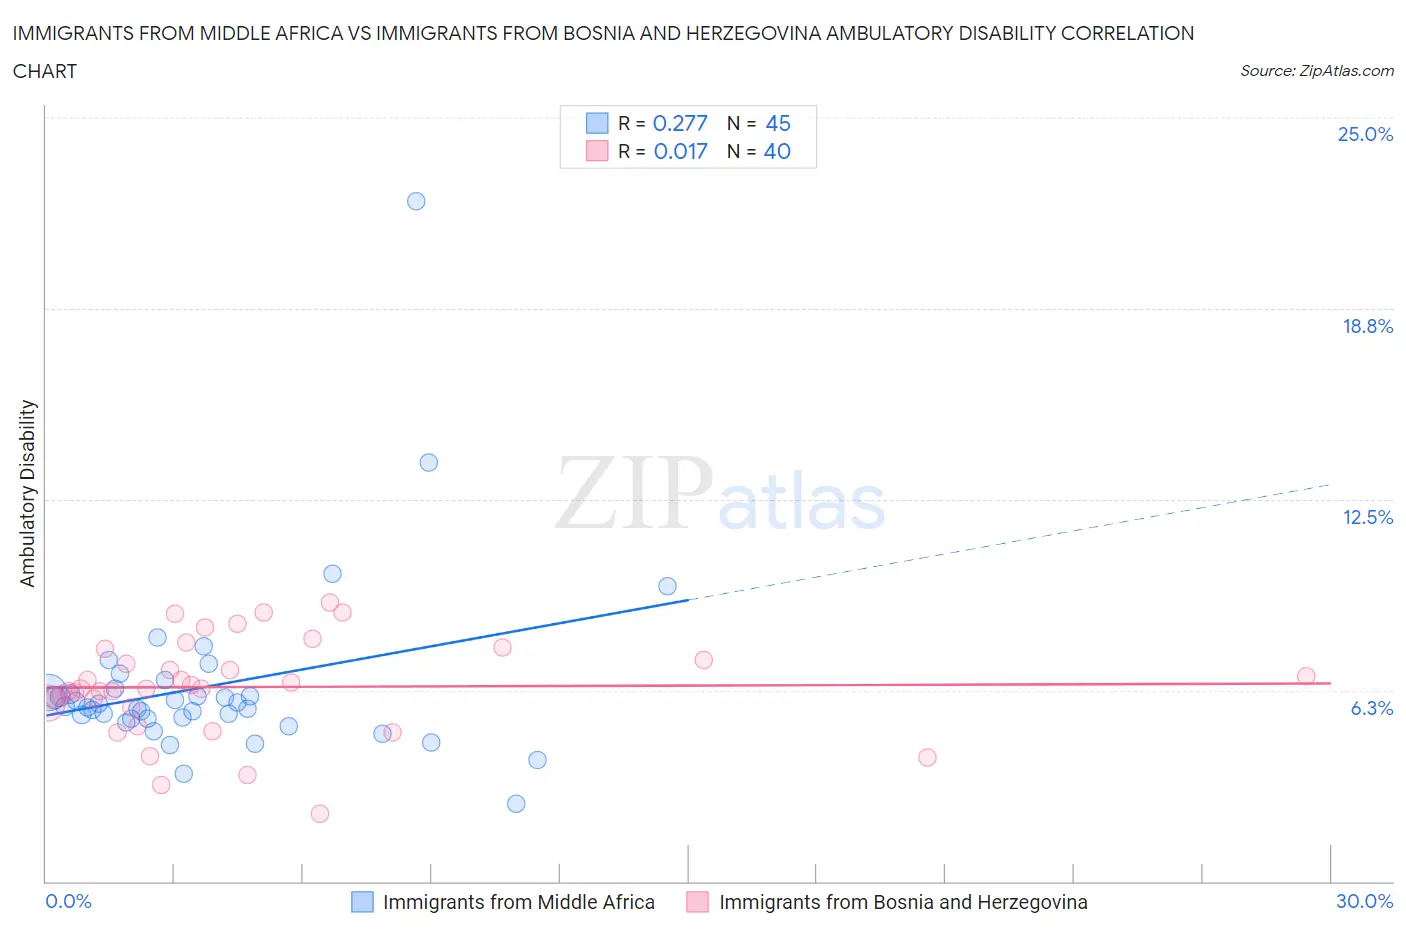 Immigrants from Middle Africa vs Immigrants from Bosnia and Herzegovina Ambulatory Disability